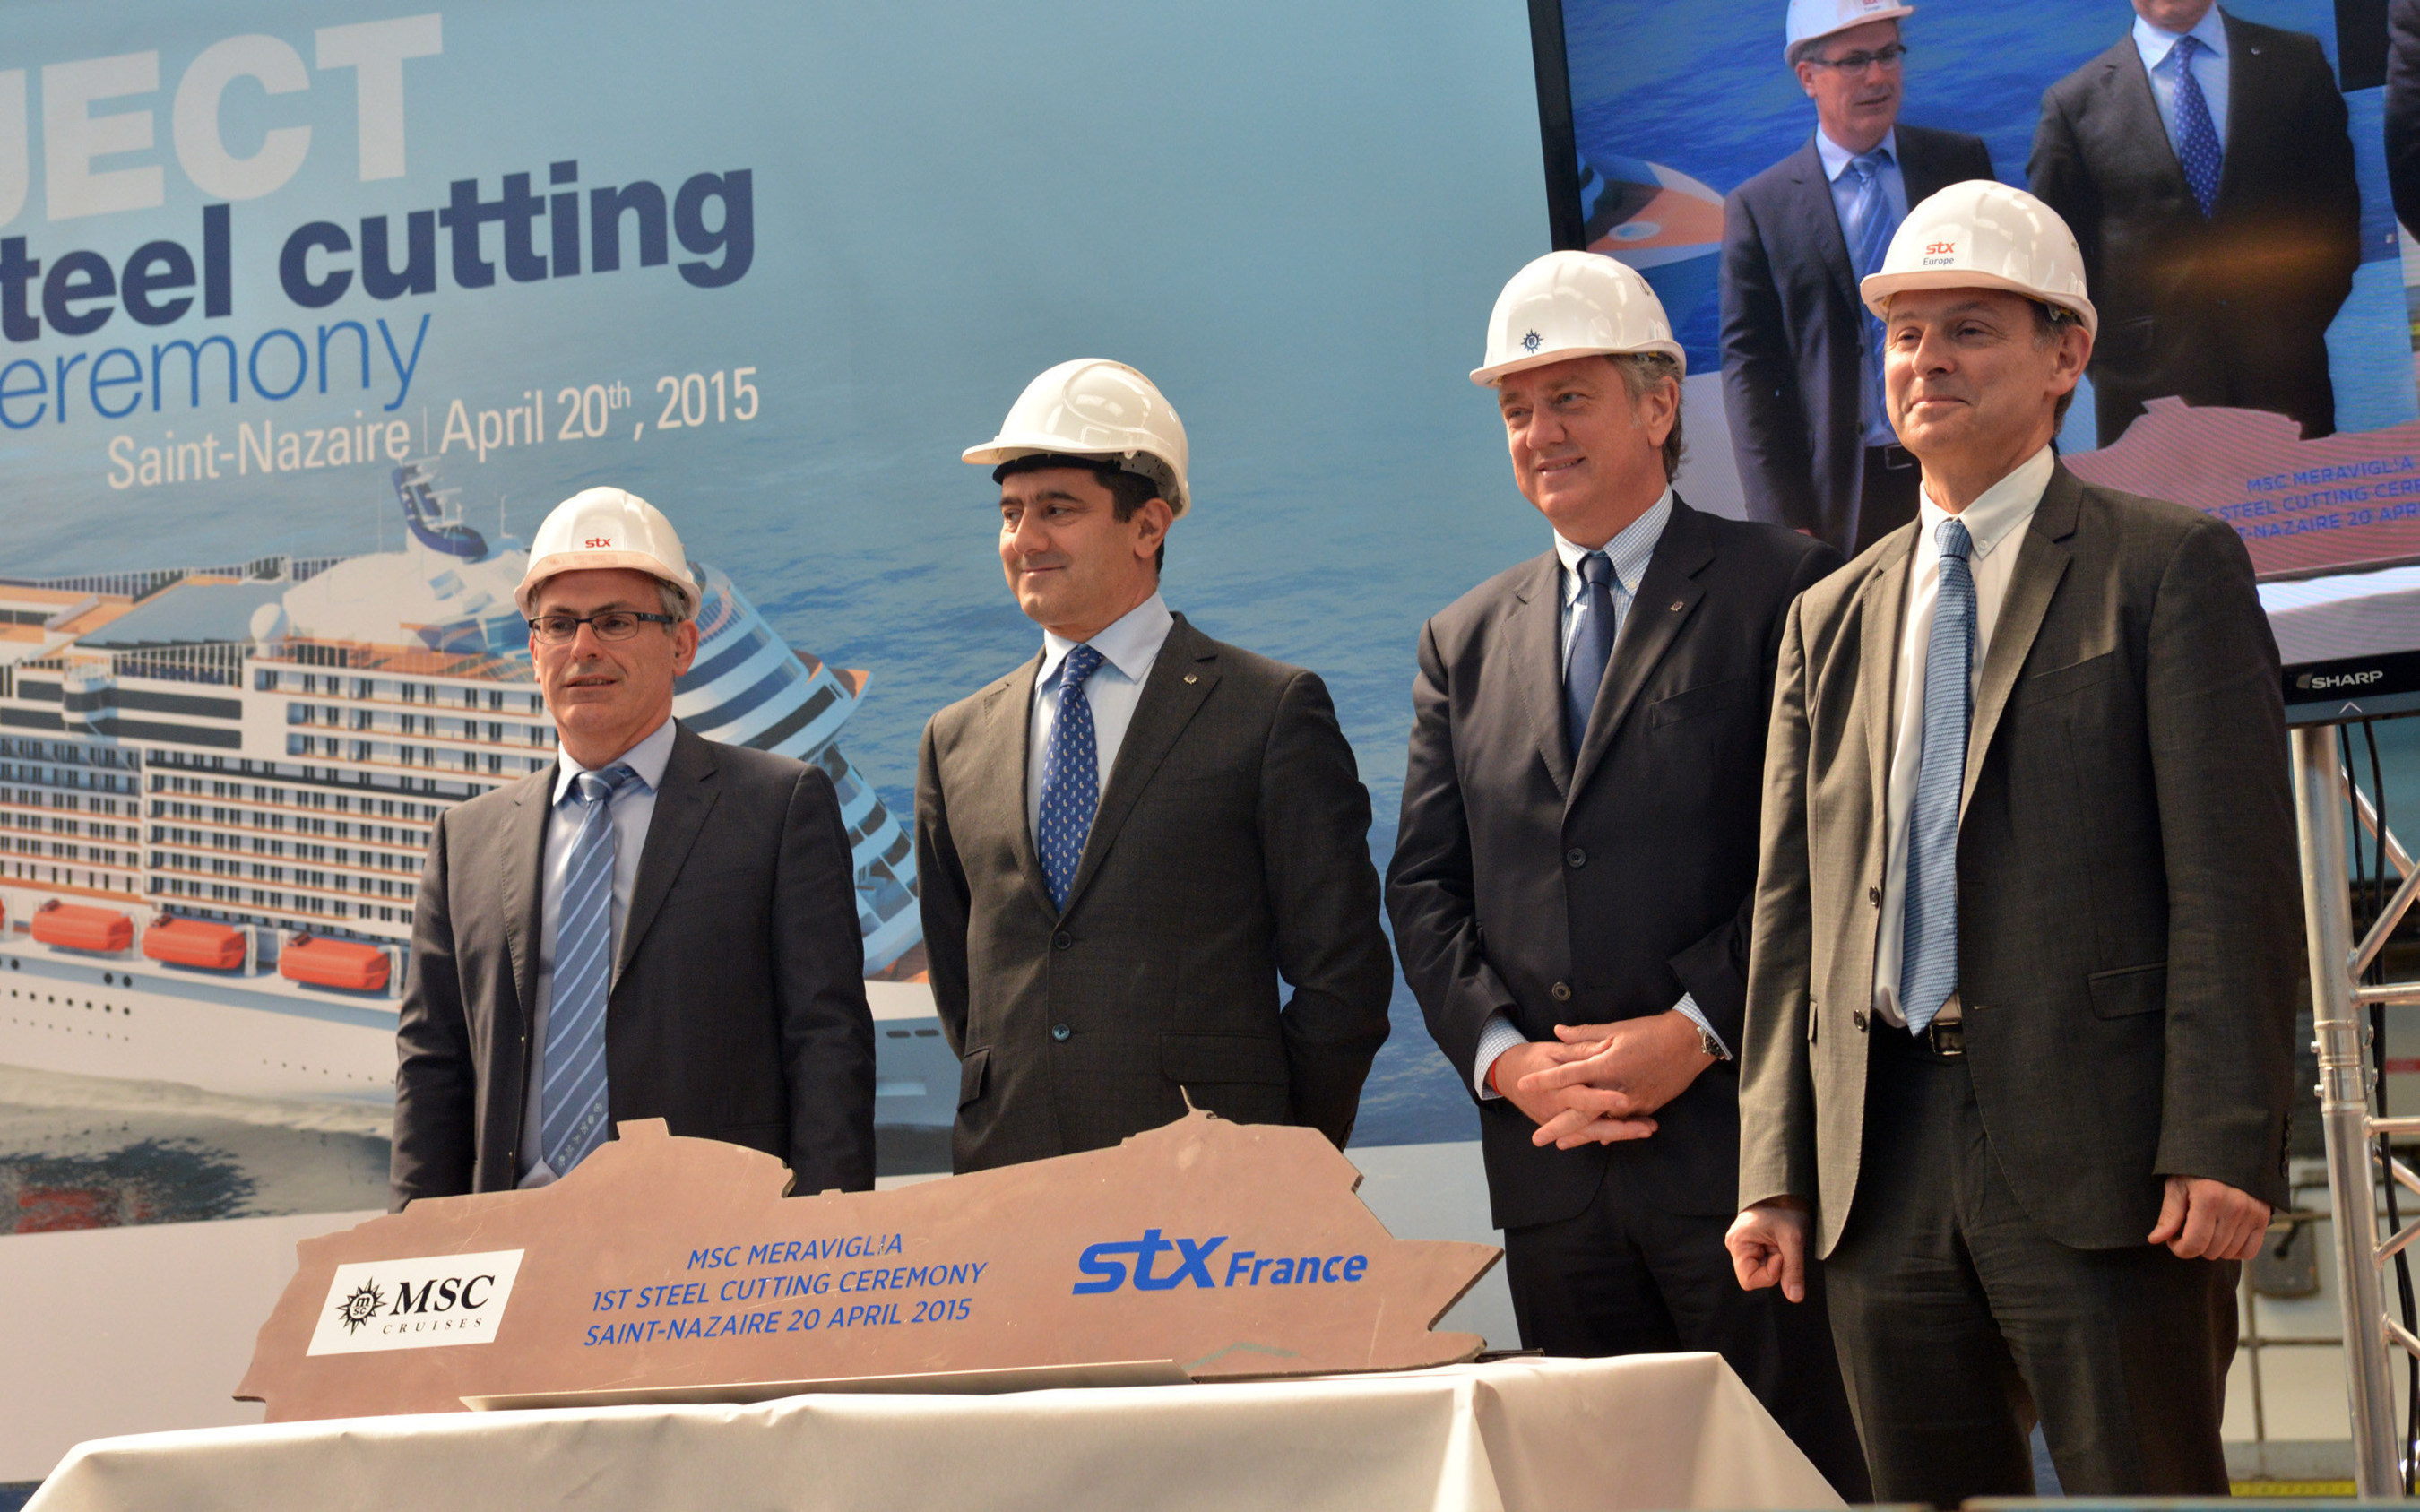 Marked by a steel cutting ceremony today in Saint-Nazaire, work is now underway for the first of MSC Cruises' $5.4 billion, 7-ship investment plan to double its capacity by 2020. Pictured from left to right: Jean-Yves Jaouen, Senior Vice President of Operations, STX France; Gianni Onorato, Chief Executive Officer, MSC Cruises; Pierfrancesco Vago, Executive Chairman, MSC Cruises; Laurent Castaing, General Manager, STX France